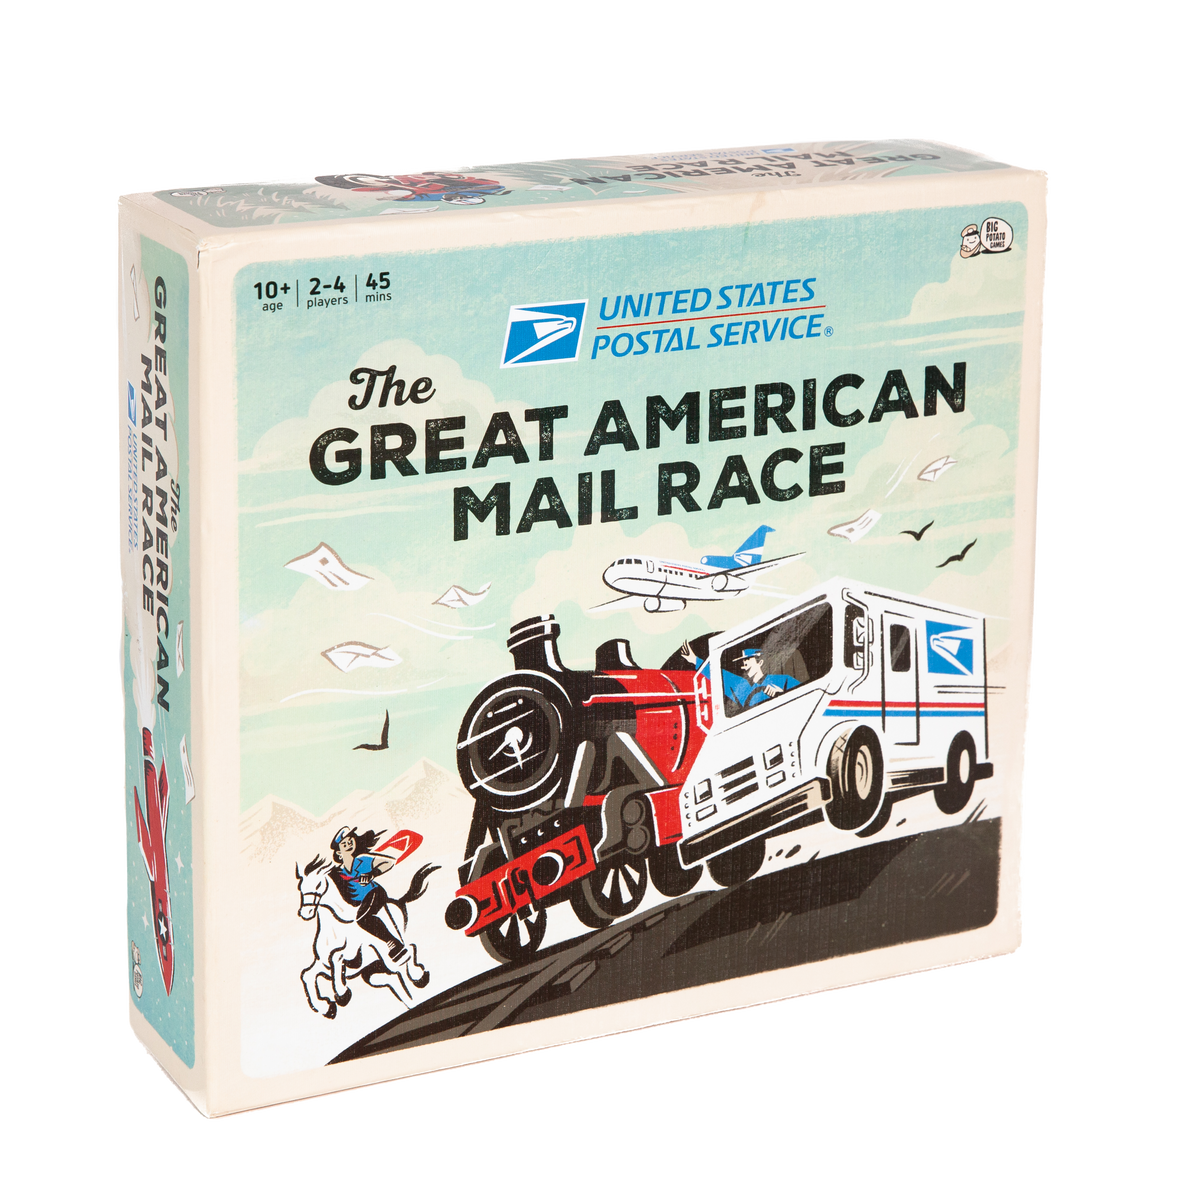 The Great American Mail Race game box